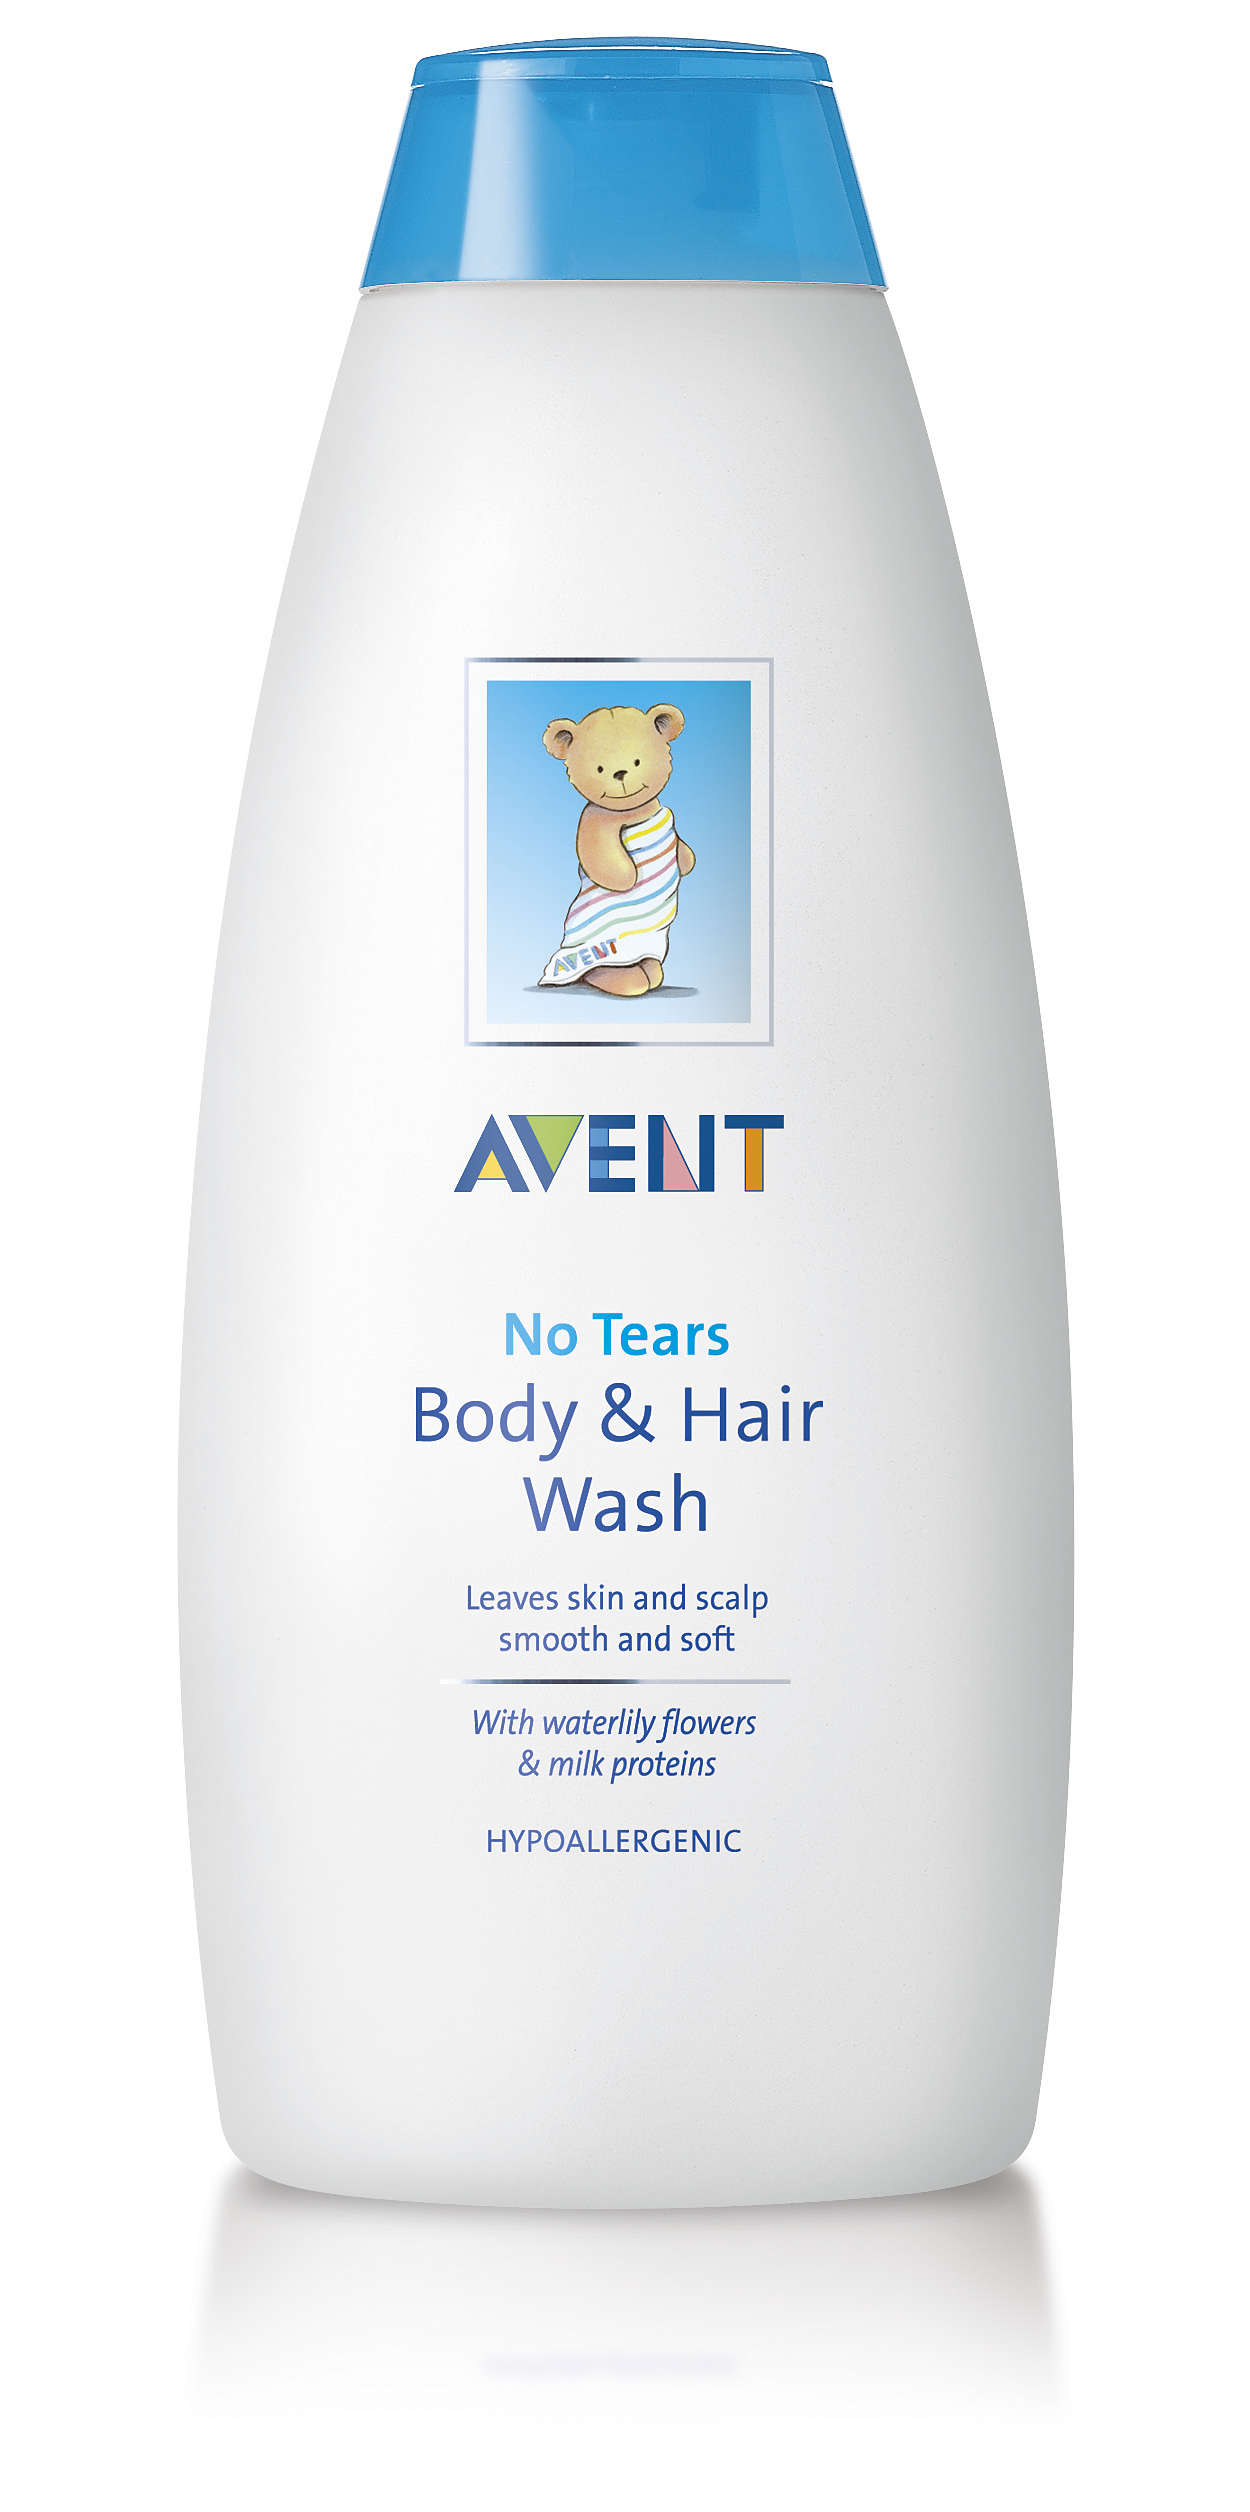 Leaves skin and scalp smooth and soft